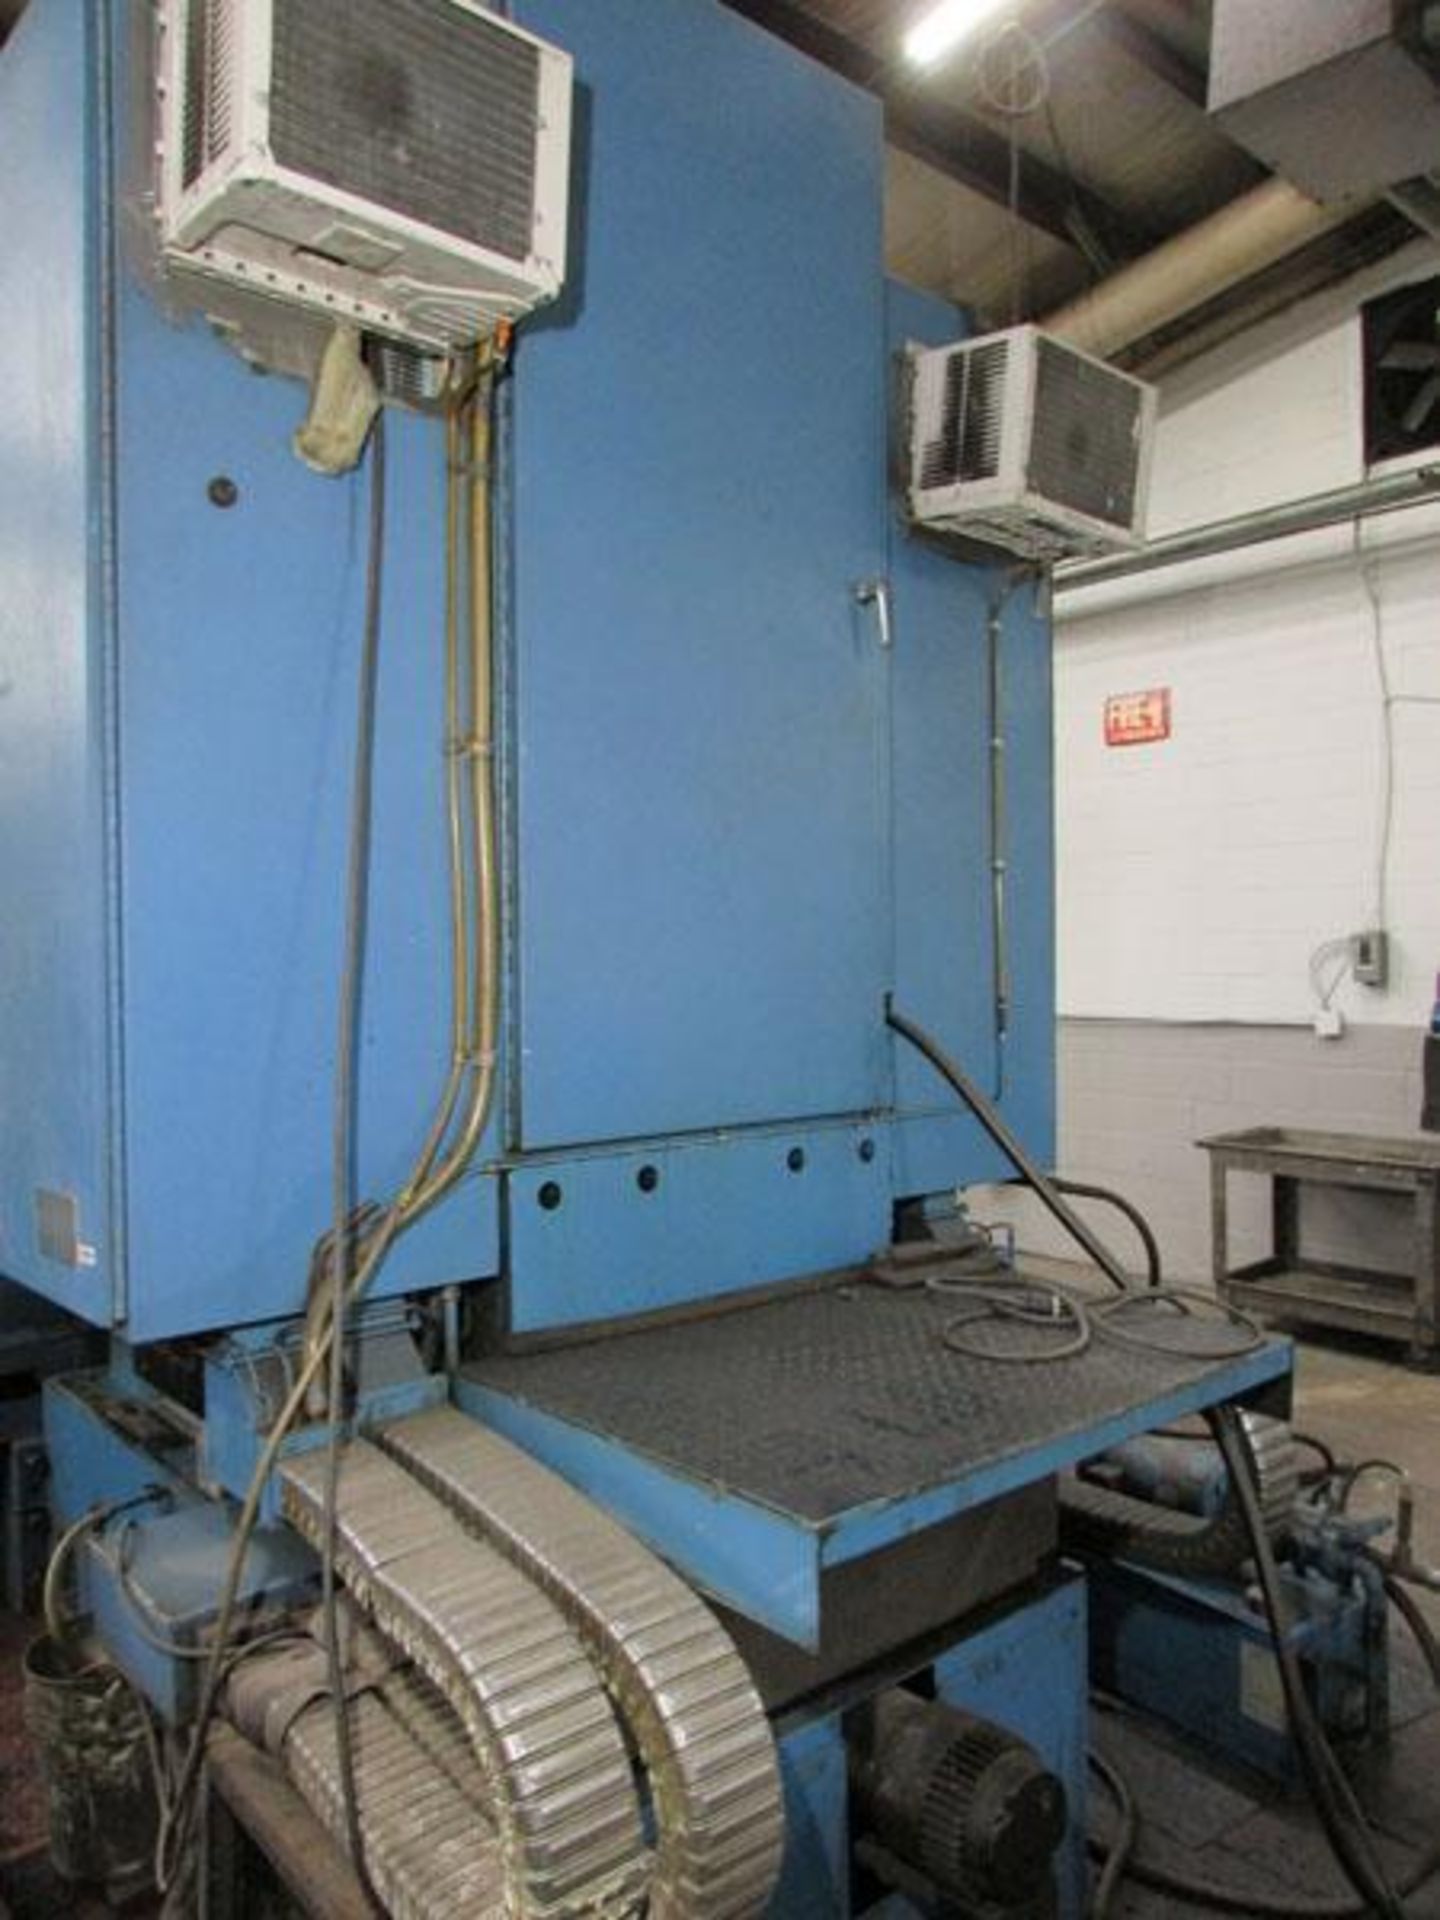 Seaberg MCP 750 8 Spindle CNC Vertical Milling Machine - Image 16 of 20